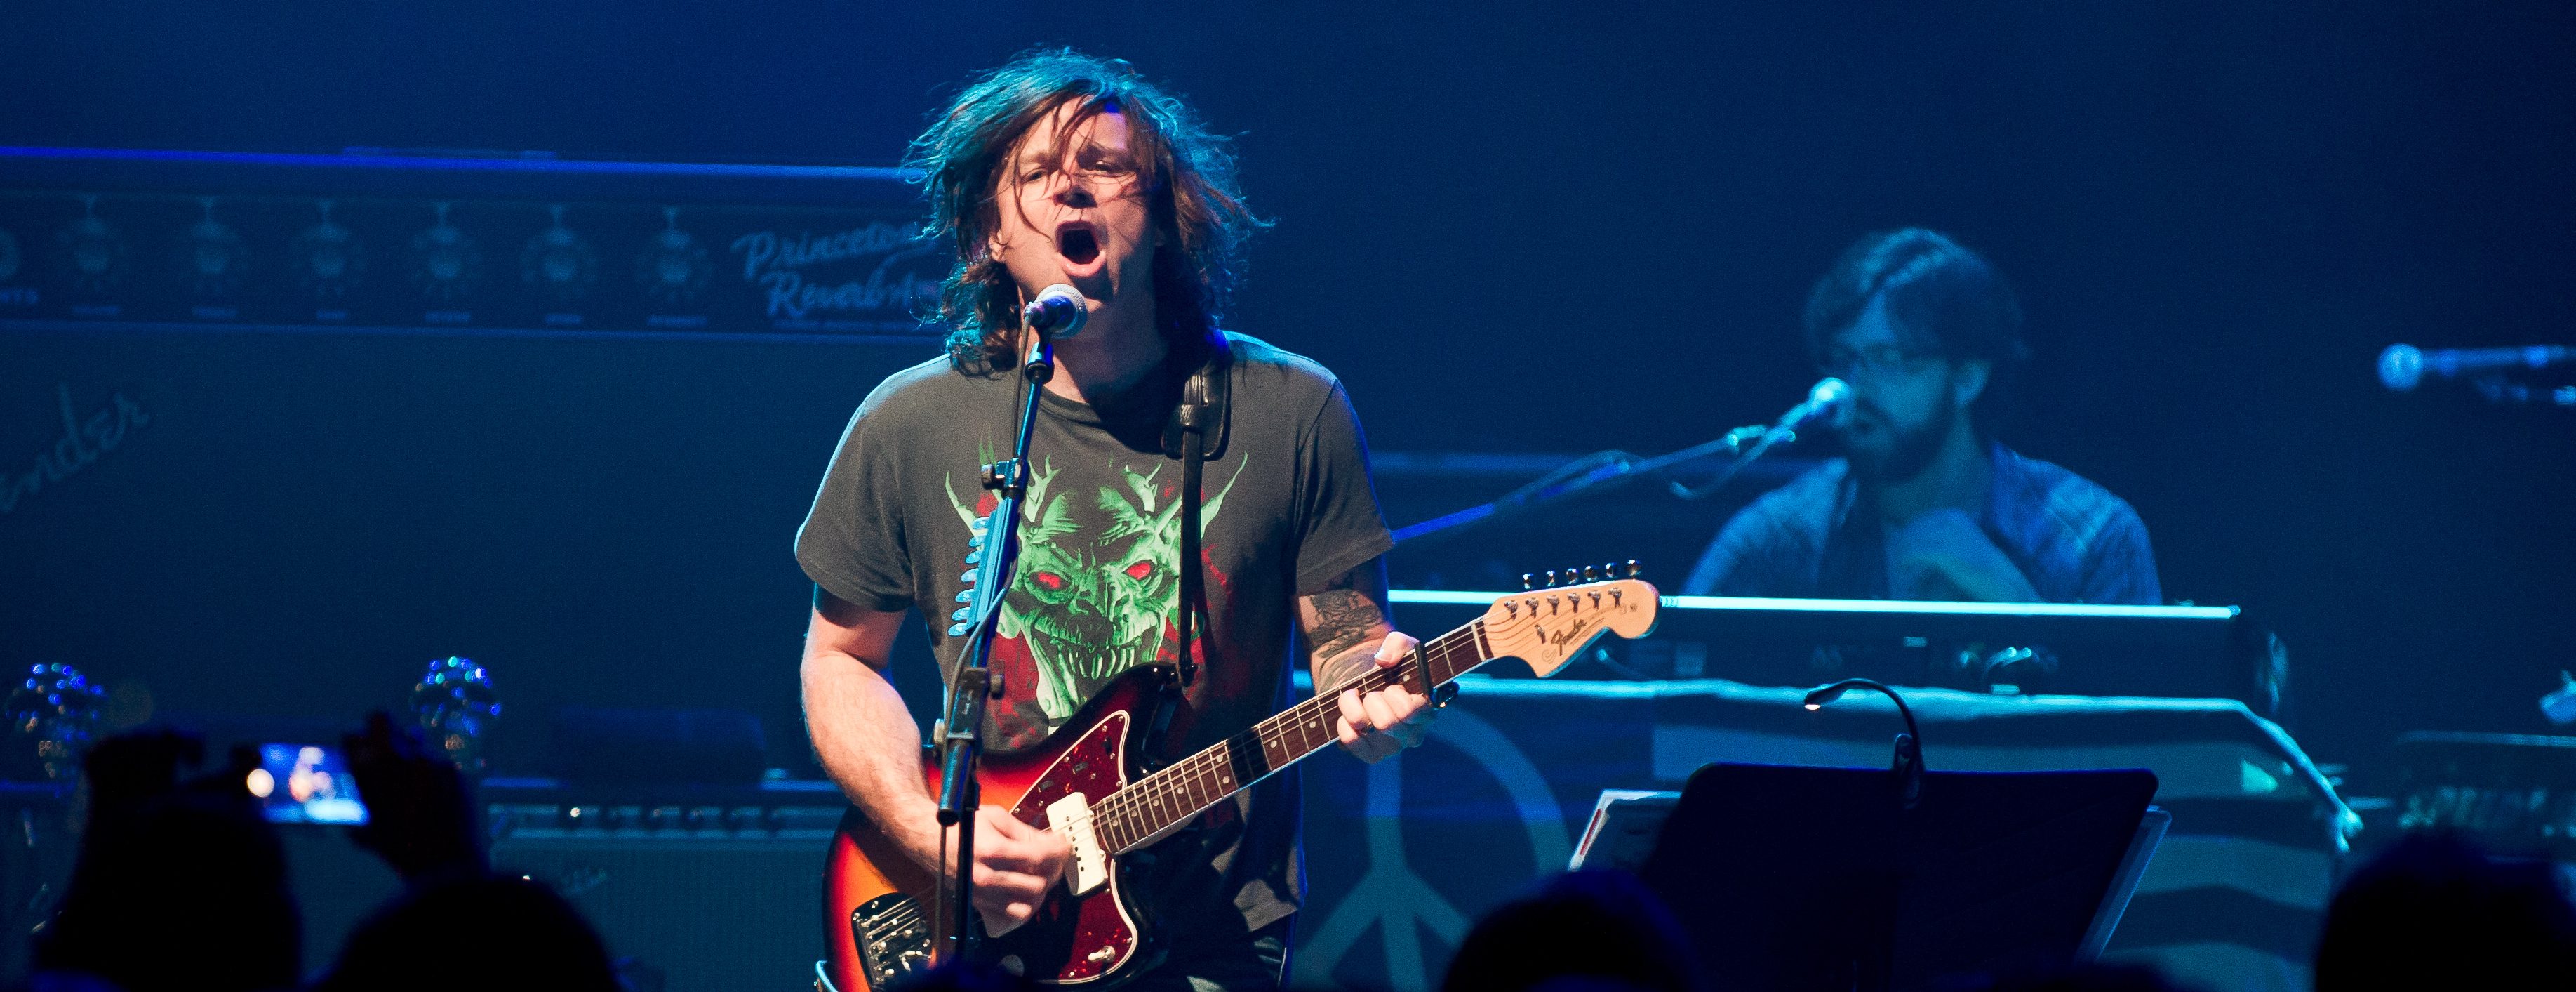 Forget Boycotting Ryan Adams, It’s the Broken Record That Needs Fixing